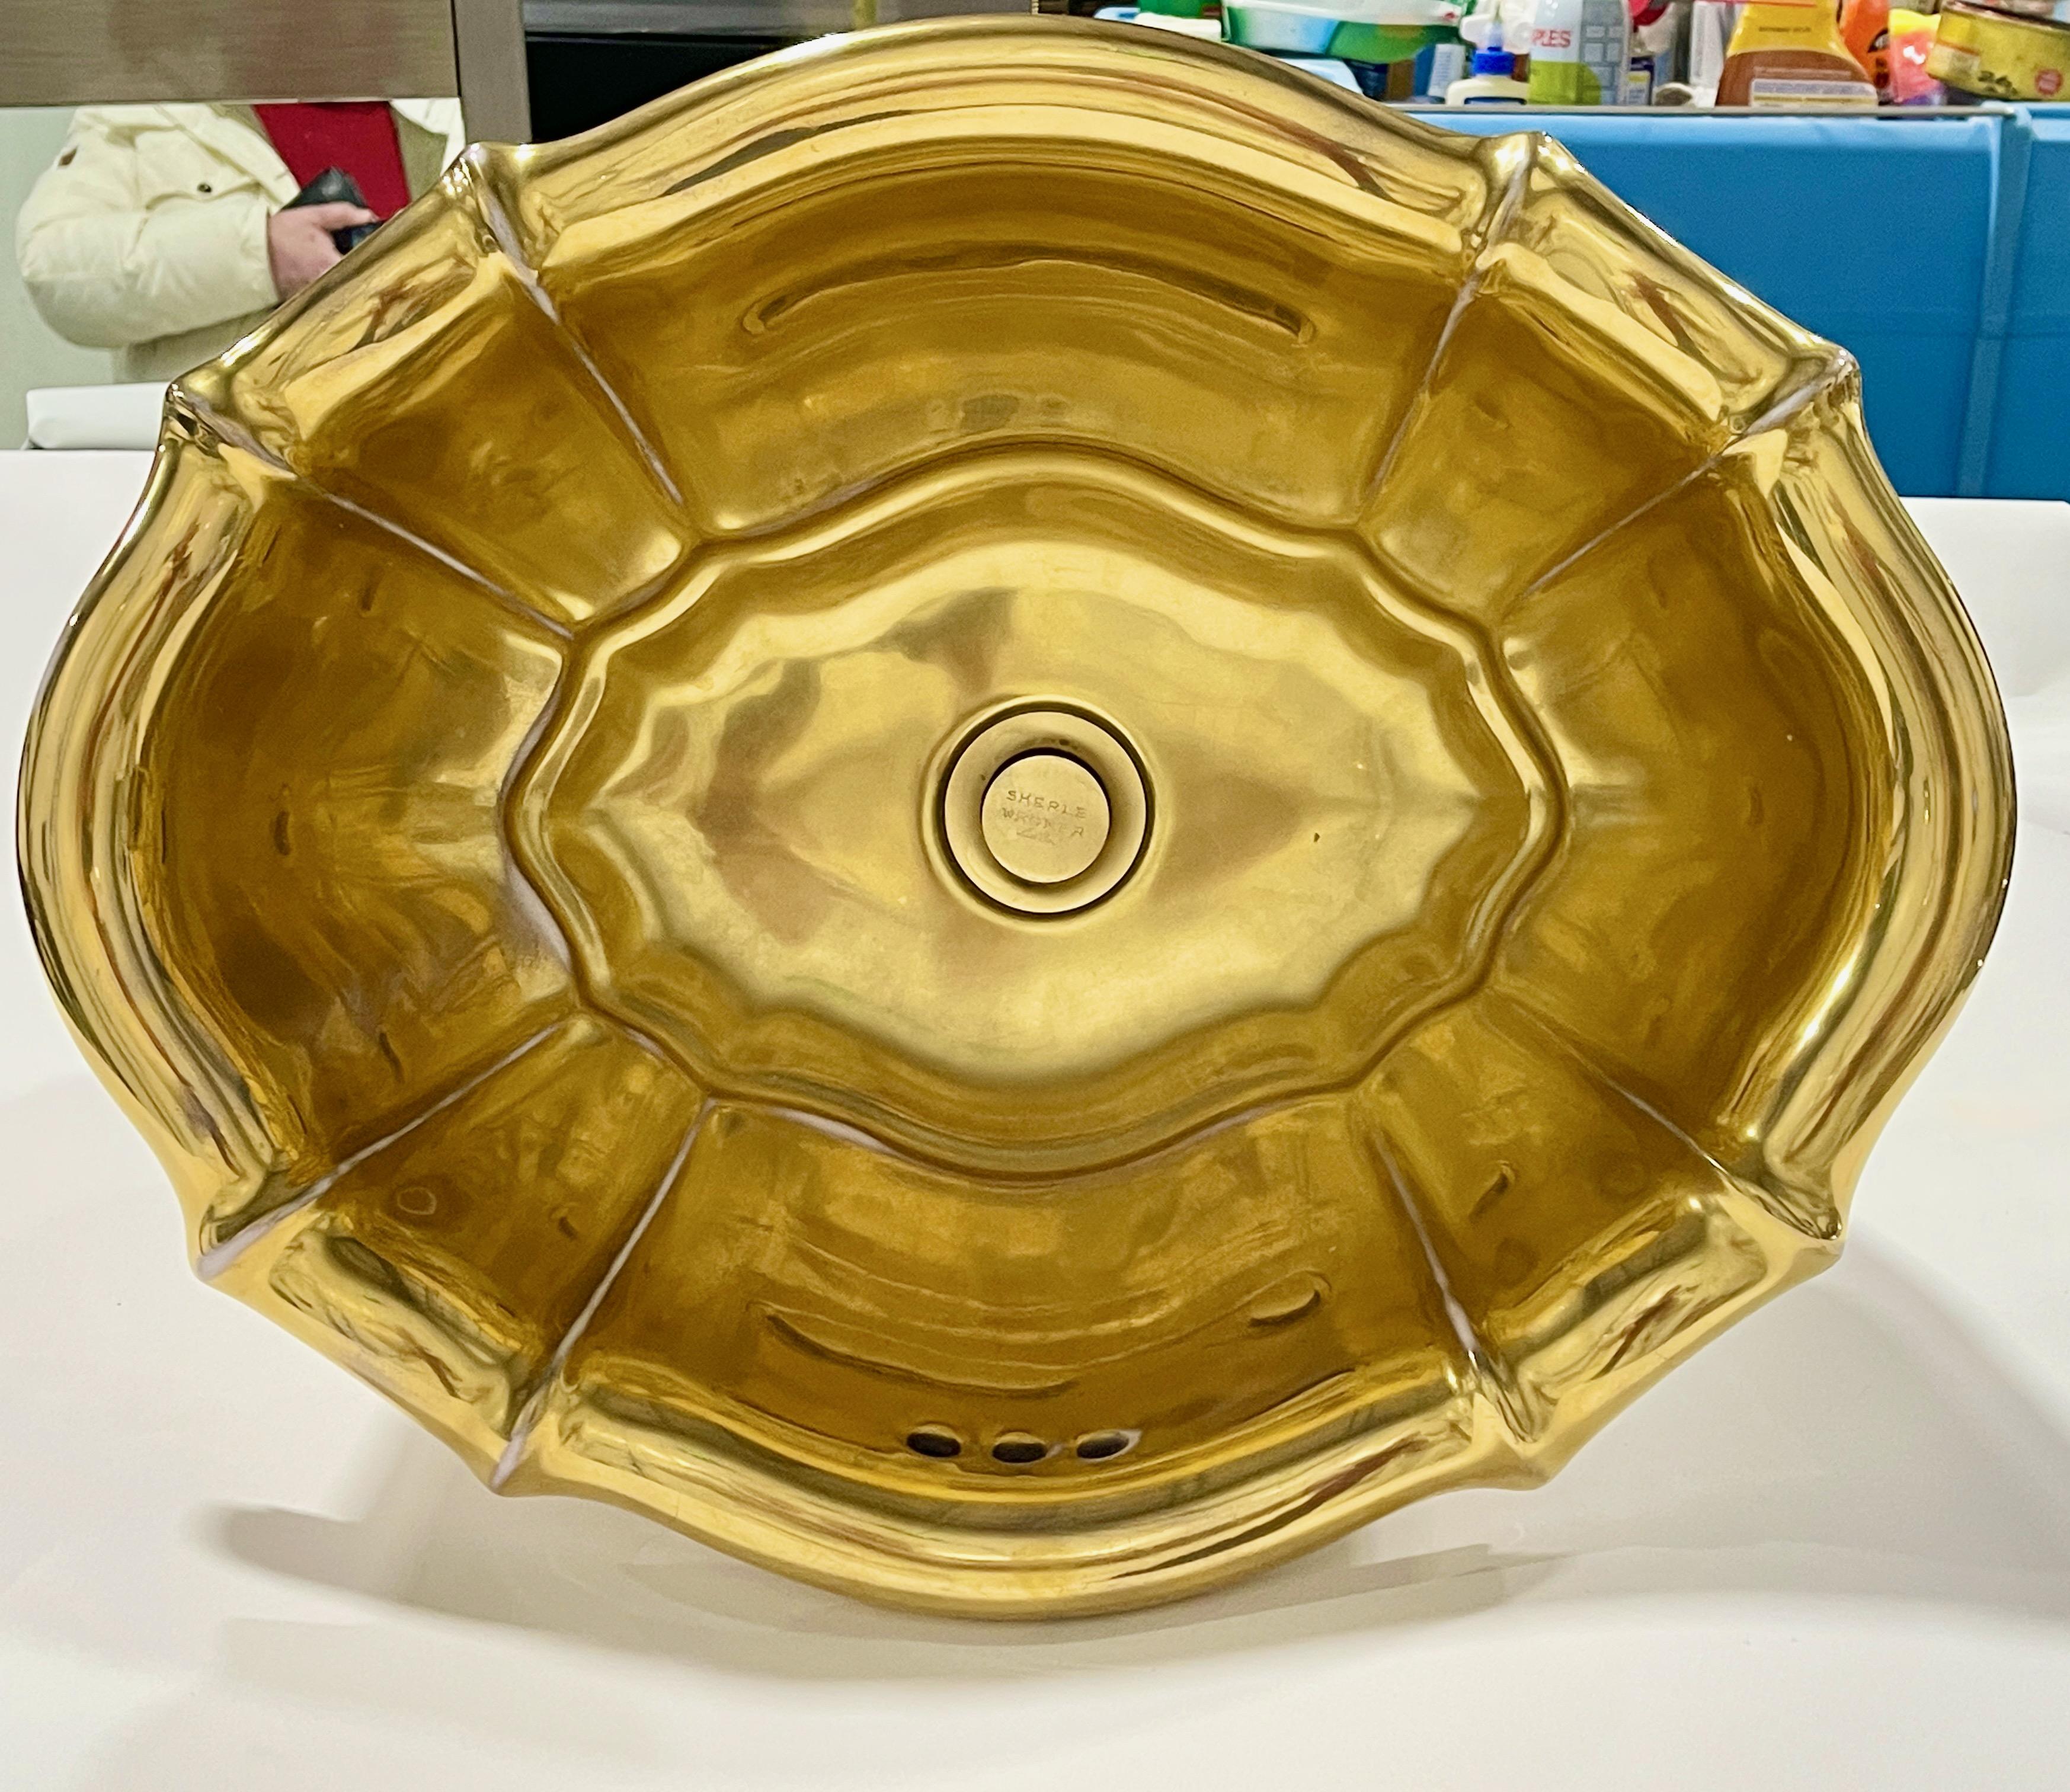 Sherle Wagner gold decorated porcelain sink, scalloped oval form, over edge, counter inset. 
Labeled to porcelain: Sherle Wagner Italy. 
Brass drain also labeled Sherle Wagner New York.
Affixed to underside of basin is ~5 inch brass